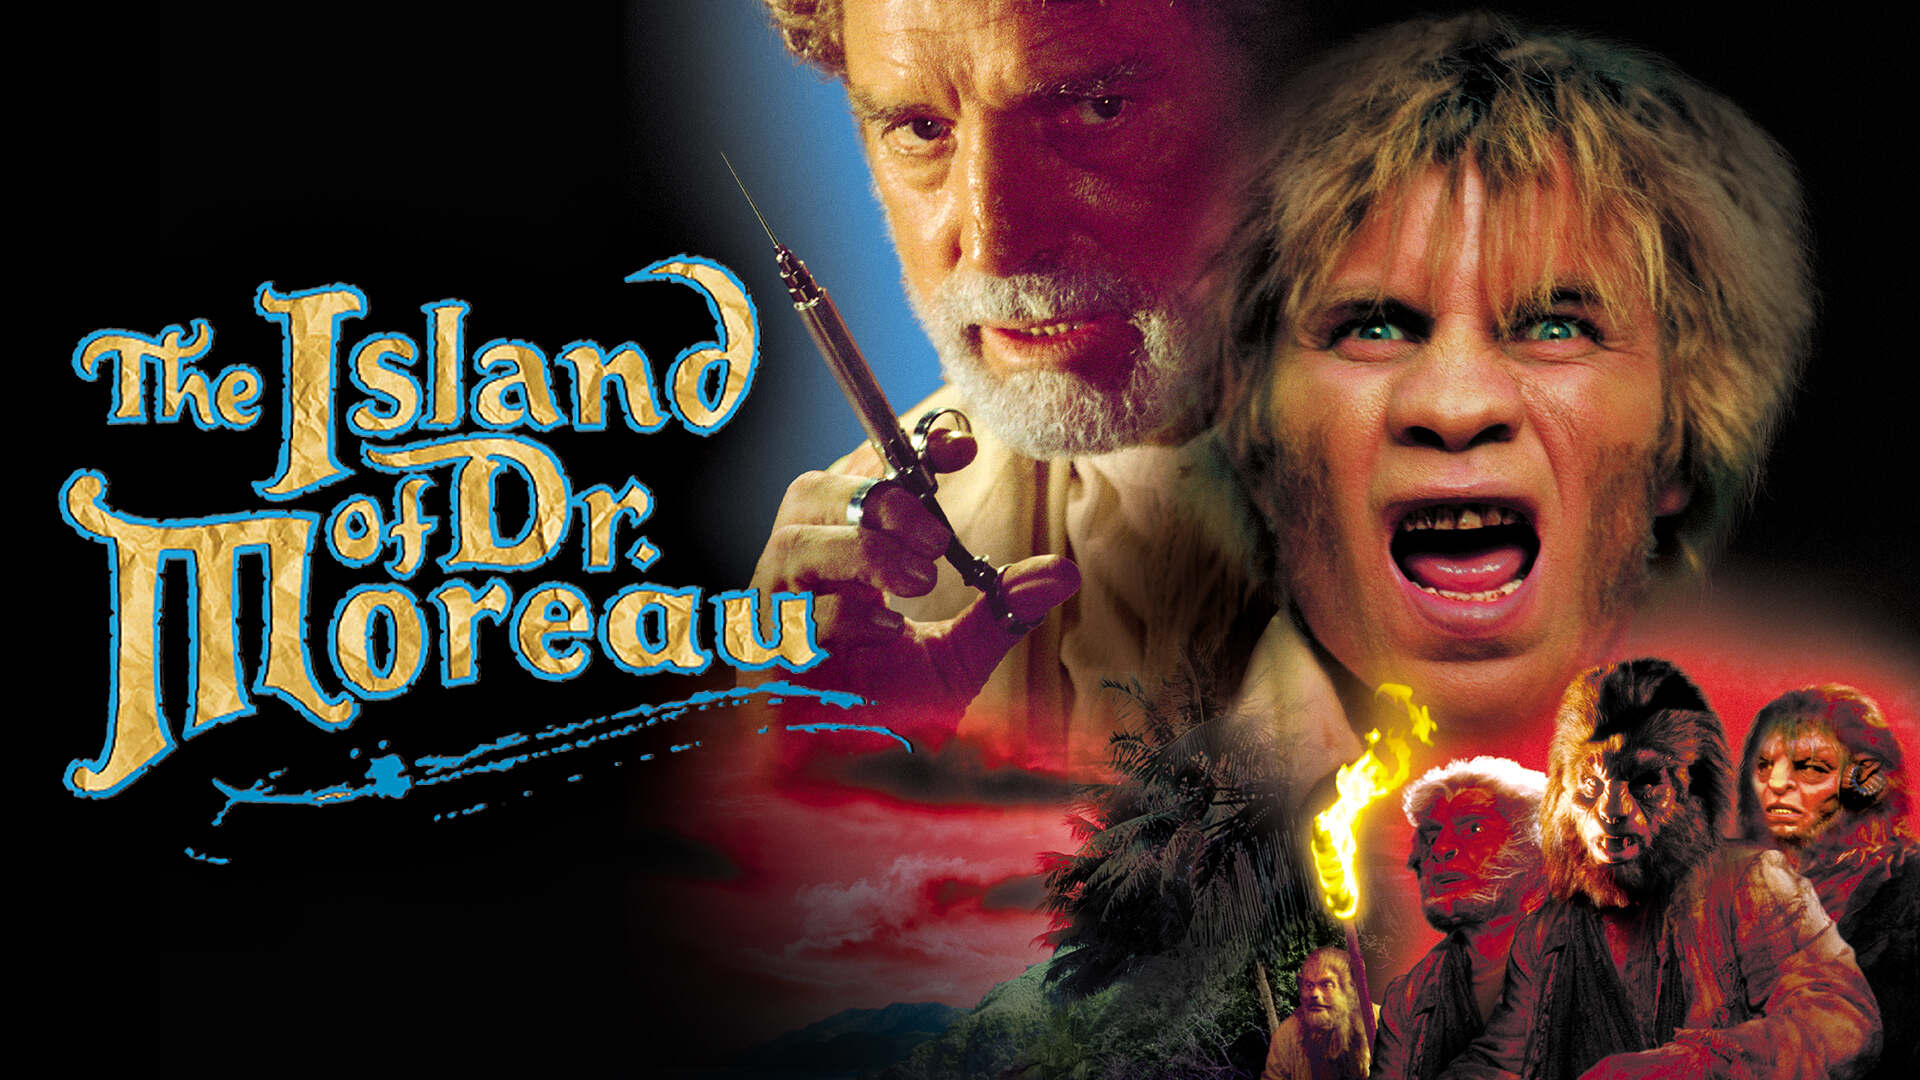 43-facts-about-the-movie-the-island-of-dr-moreau